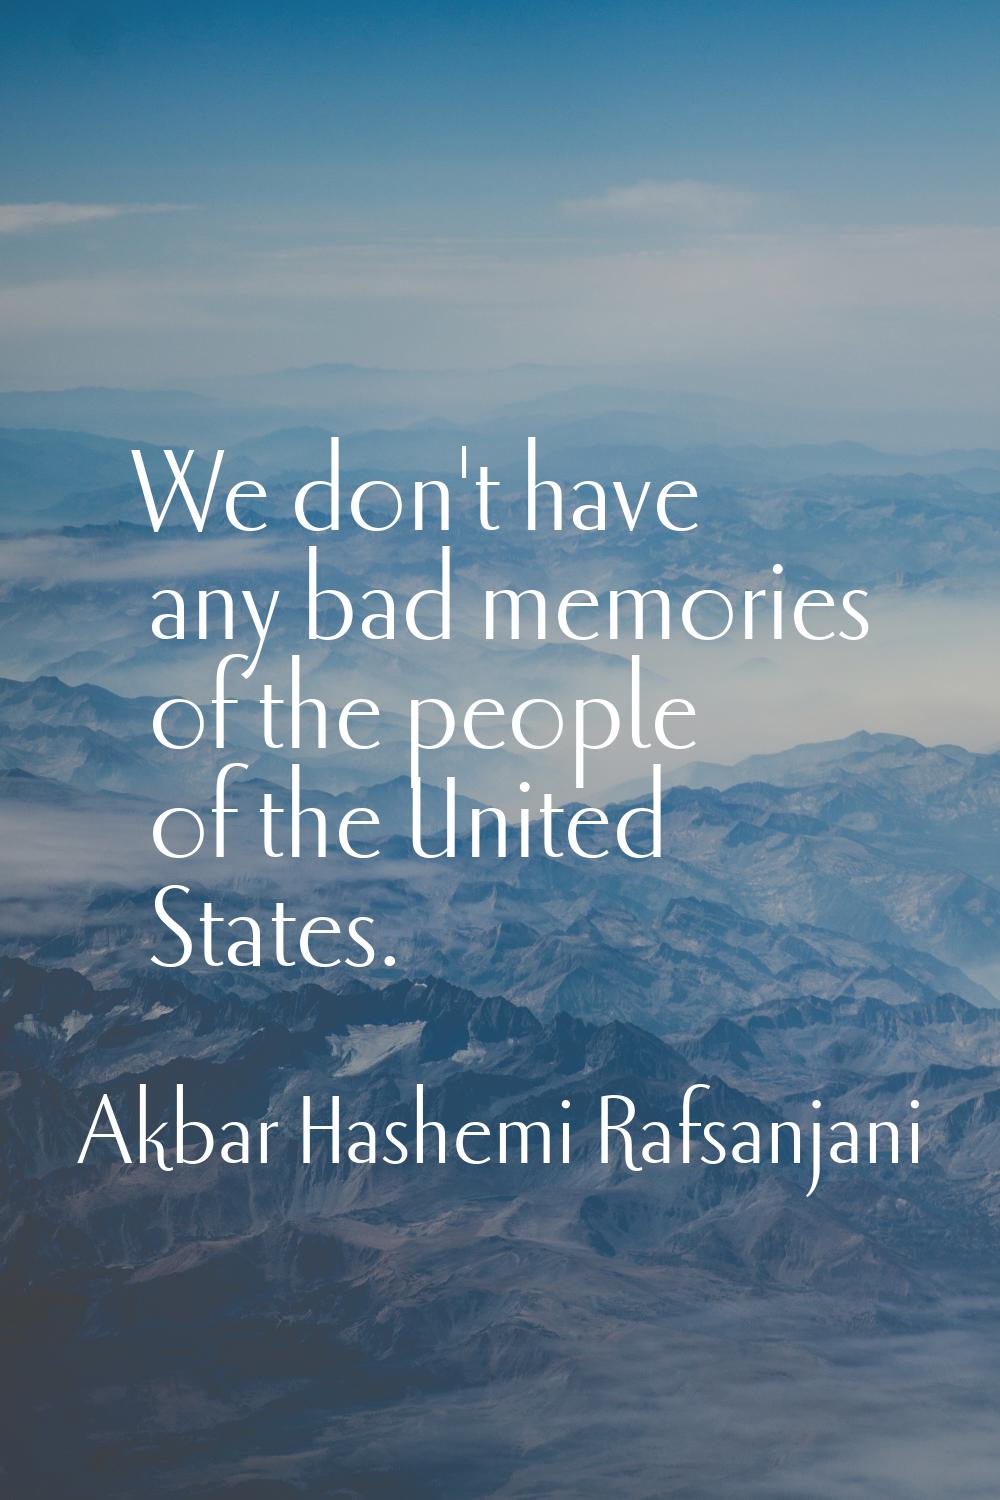 We don't have any bad memories of the people of the United States.